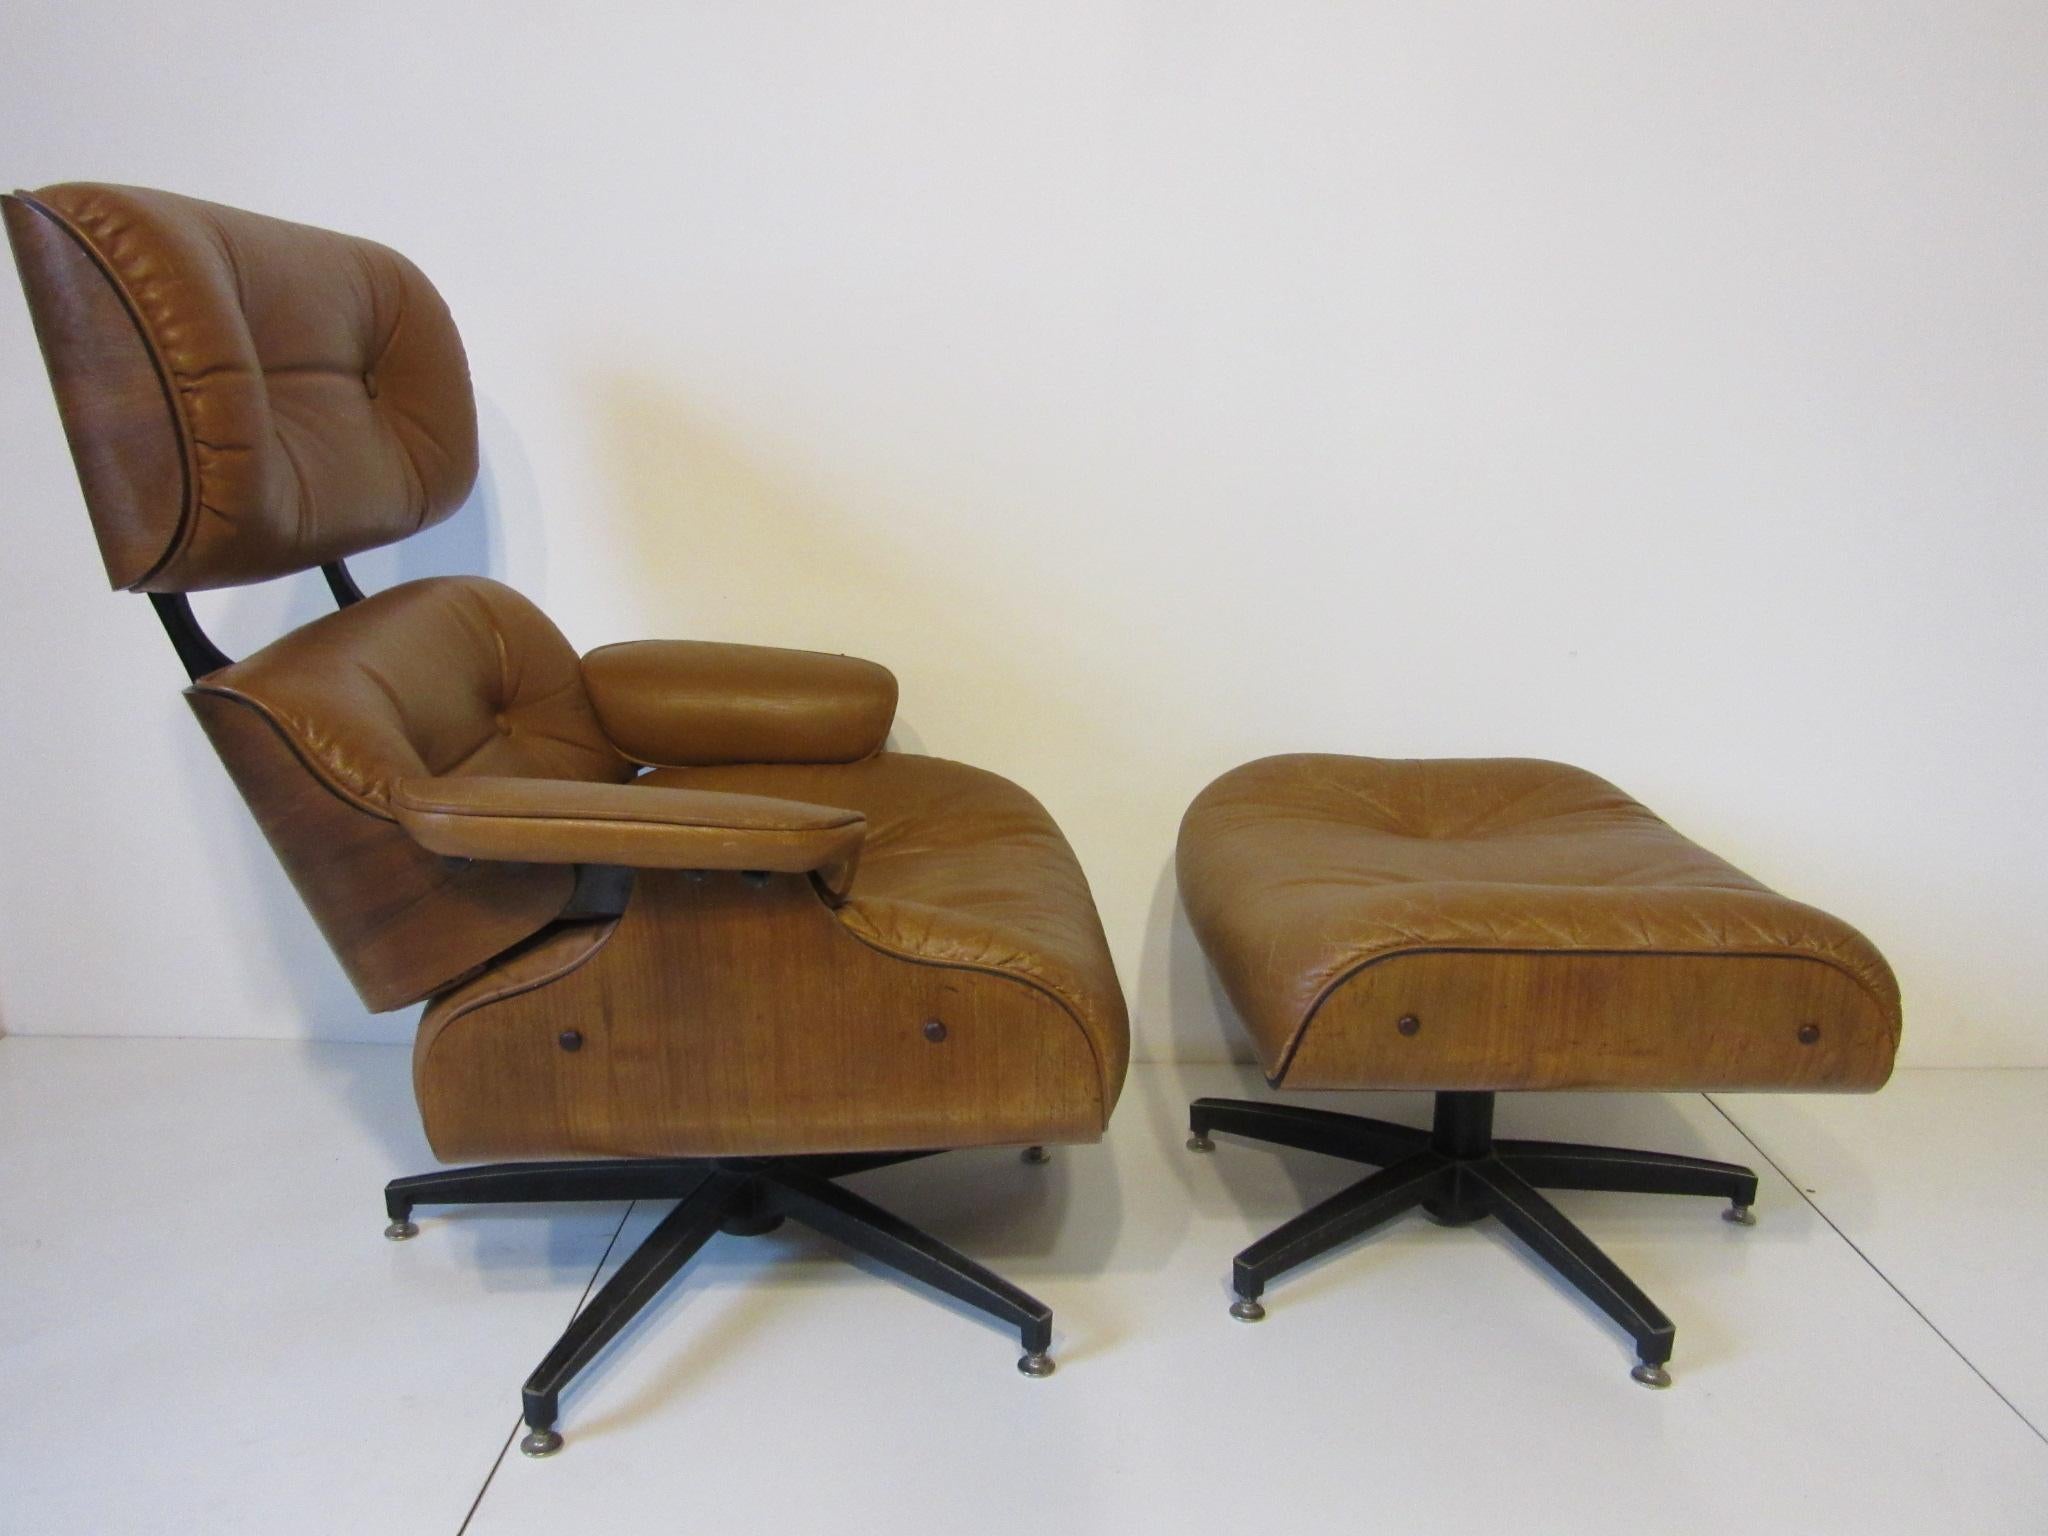 A Herman Miller, Eames styled lounge chair and matching ottoman in a soft saddle colored tufted leather having a slight rocking and a swiveling mechanism for comfort . Wrapped in a medium toned walnut frame with five star cast aluminum base